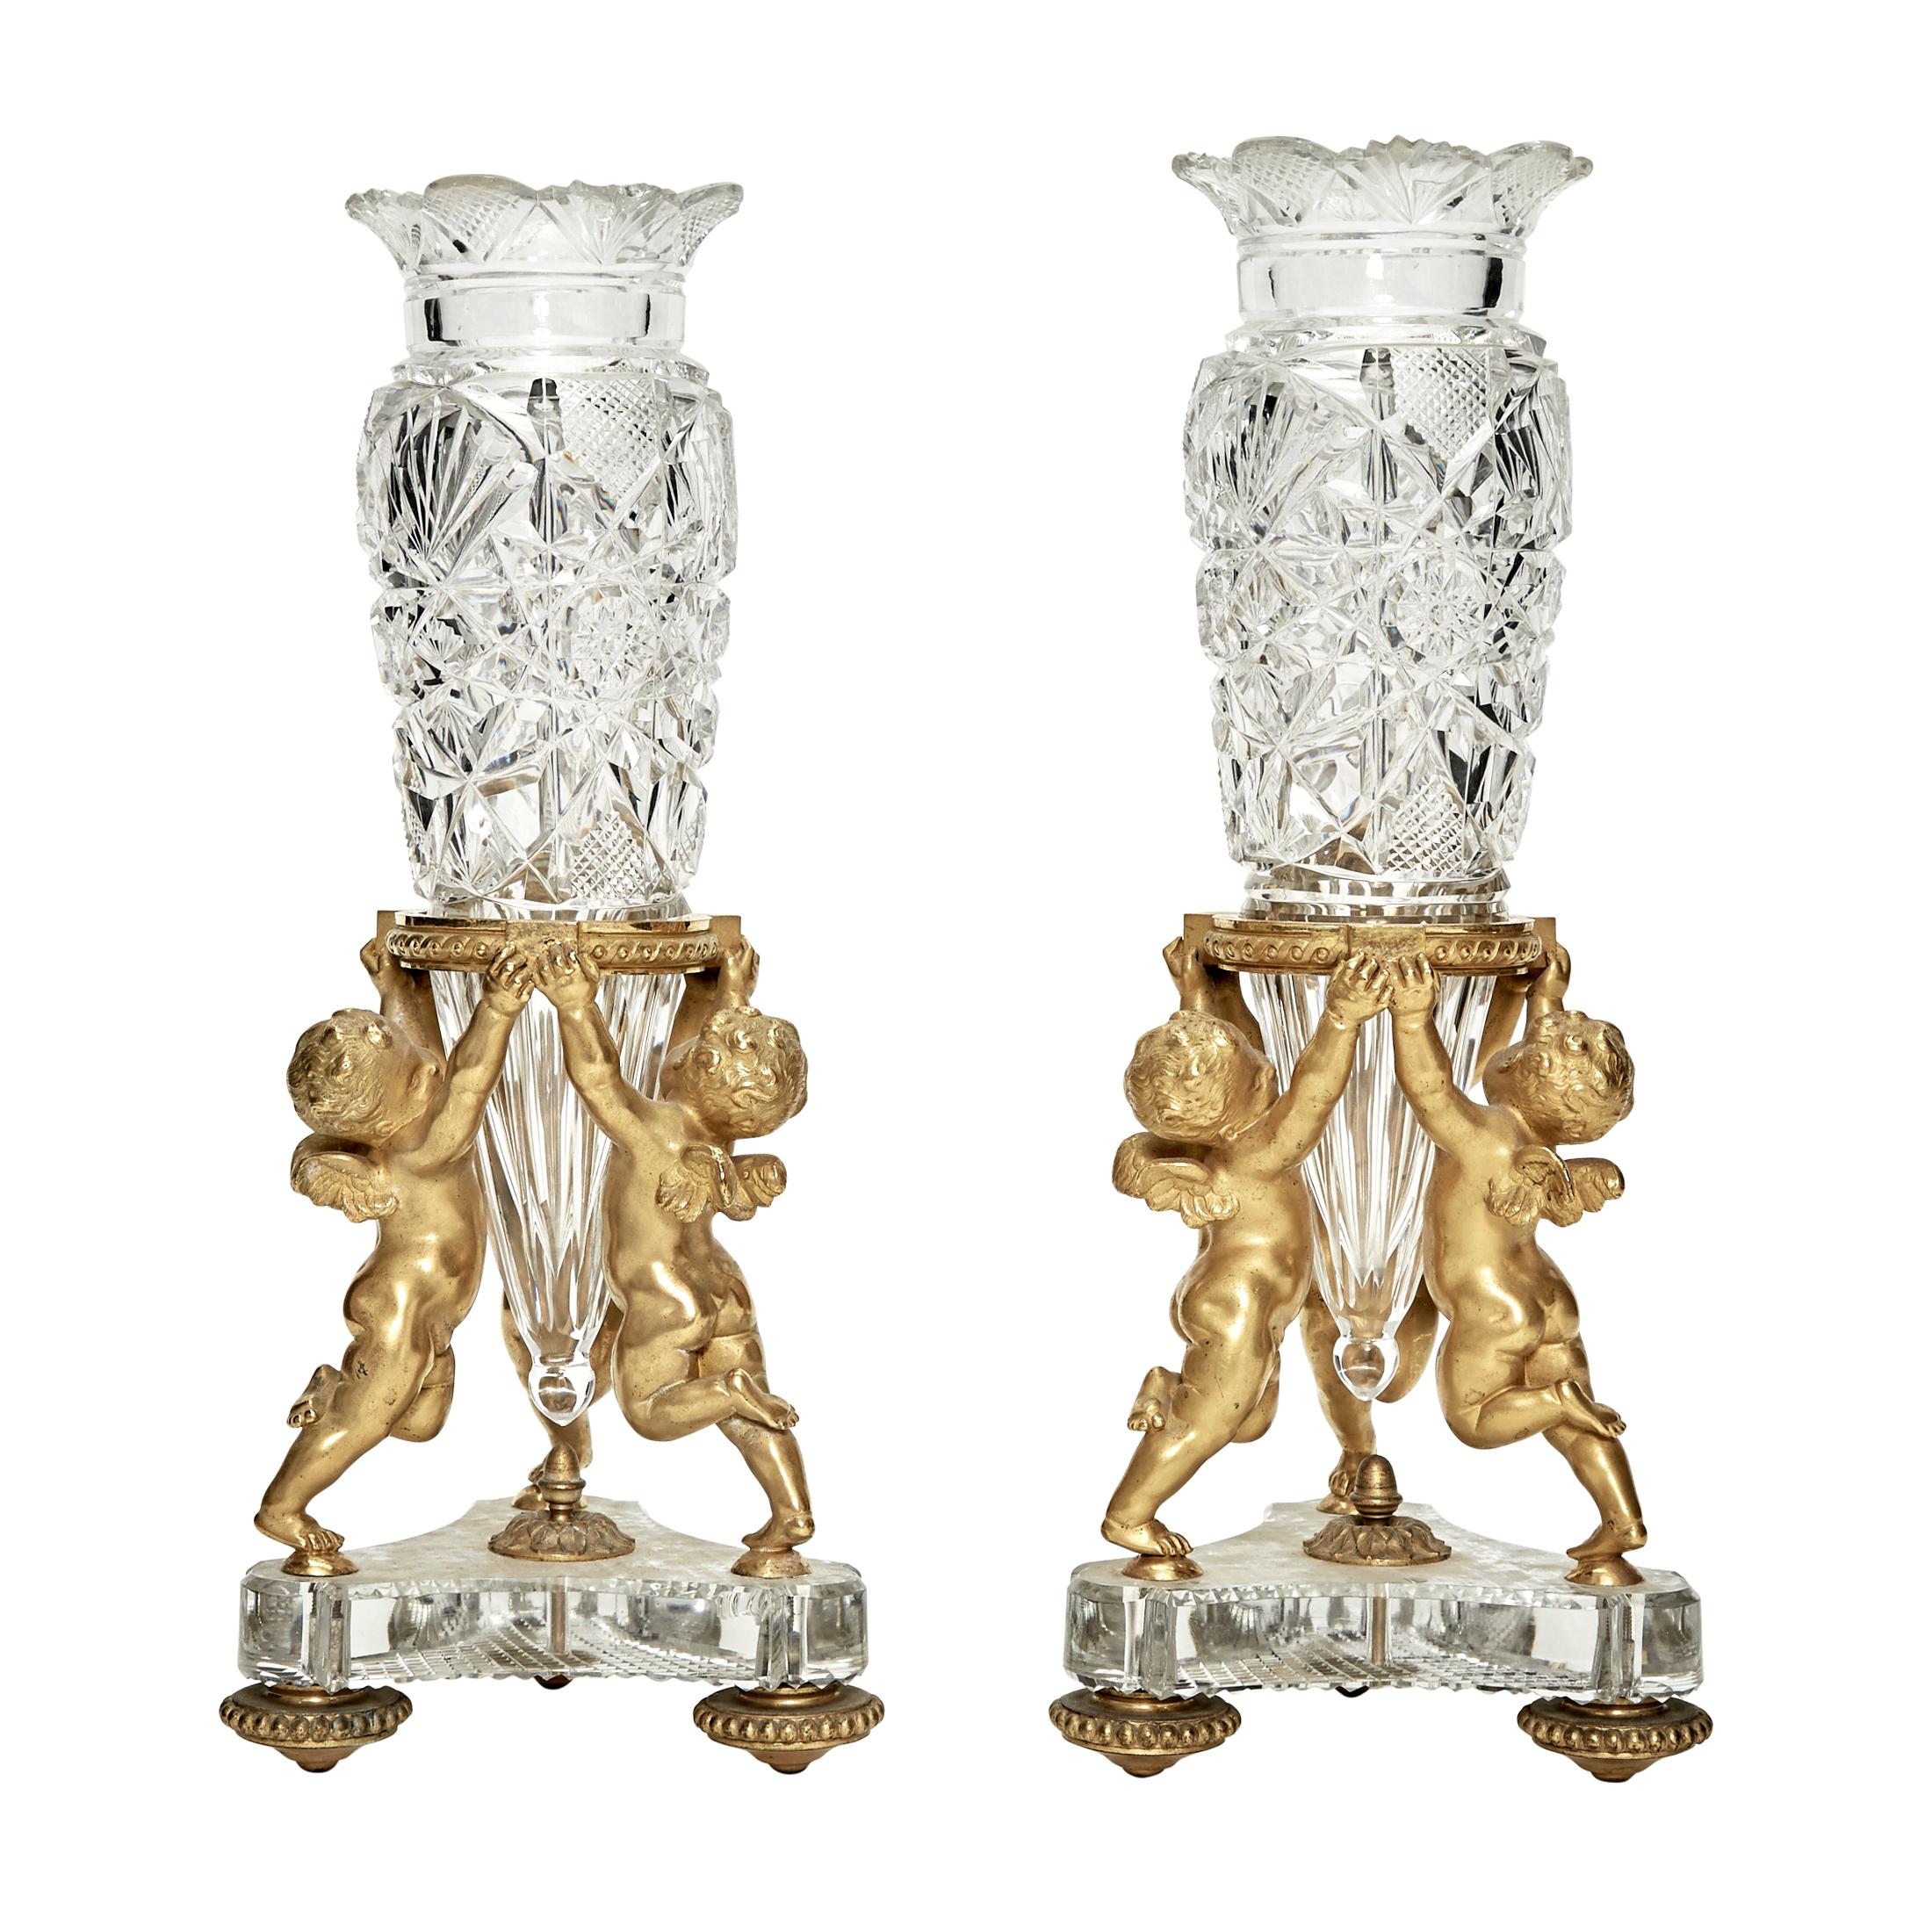 Fine quality pair of Baccarat gilt-bronze mounted cut glass figural vases. Signed under base.

Maker: Baccarat
Origin: French
Date: 19th century
Dimension: 13 3/8 in. x 5 1/2 in.